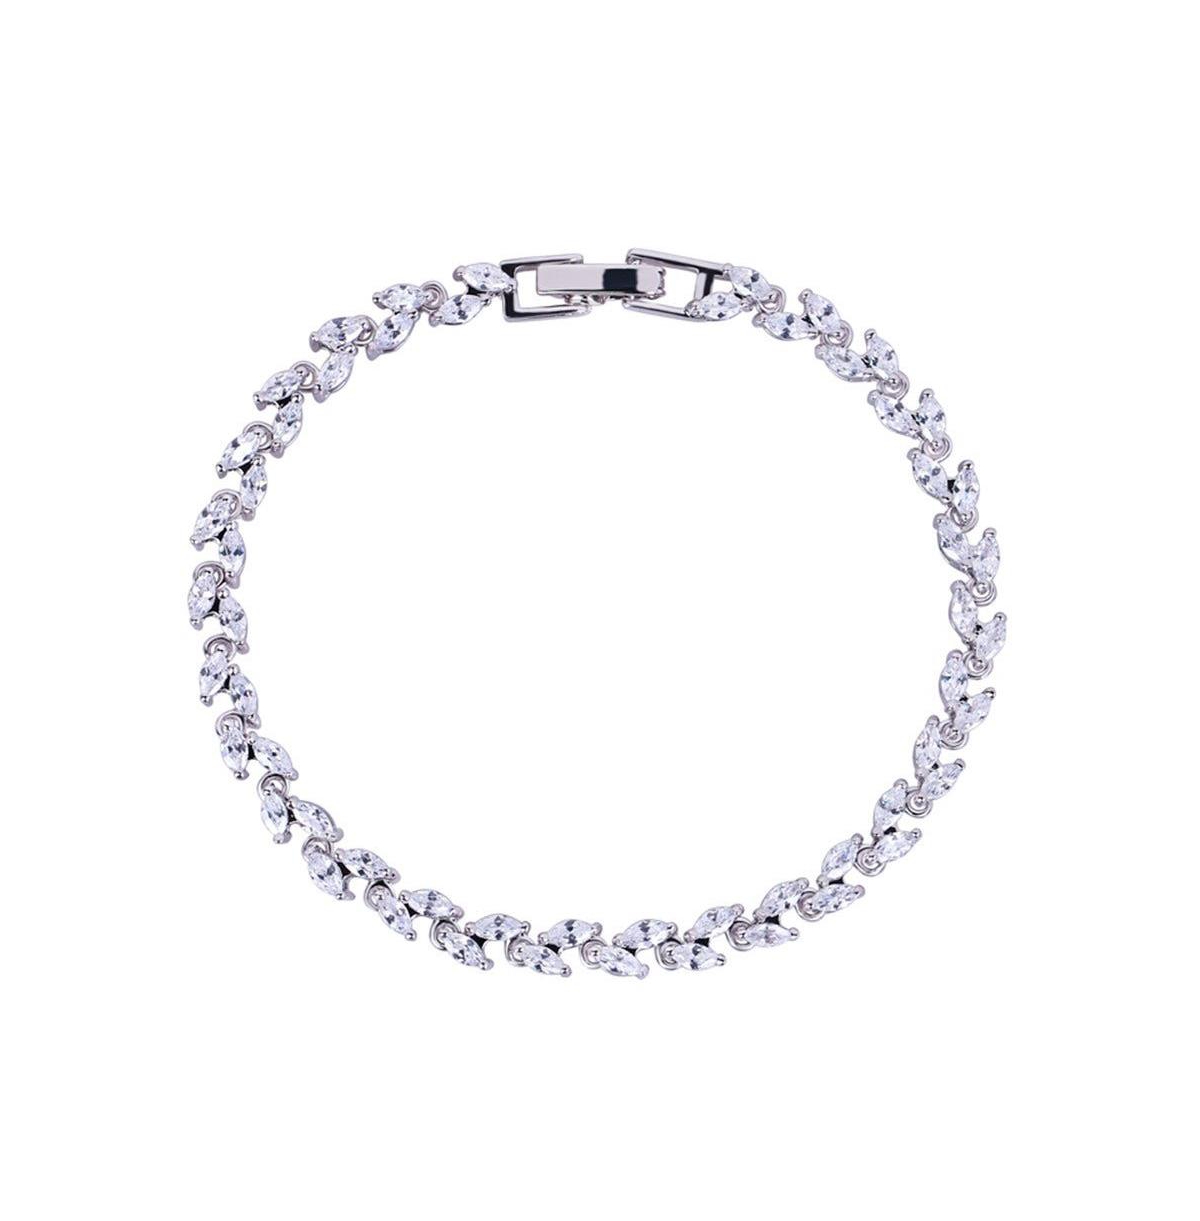 Marquise Cut Cubic Zirconia Tennis Bracelet with Cubic Zirconia - Silver